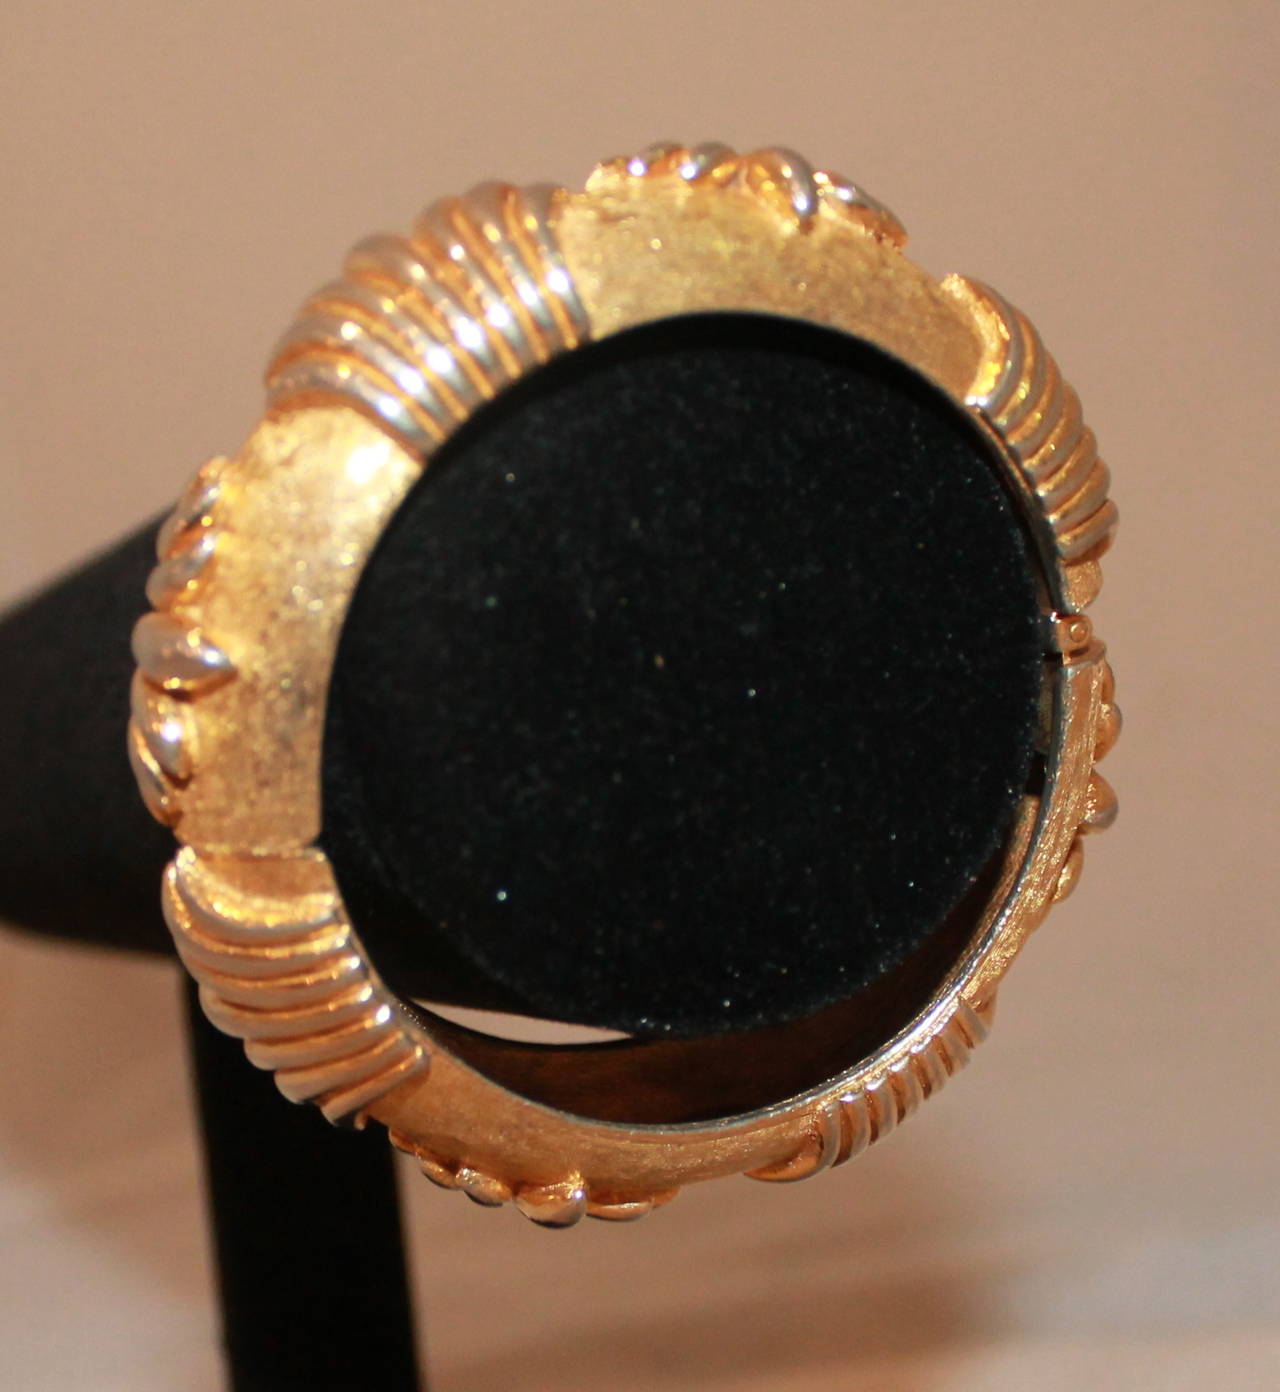 Kenneth Jay Lane Vintage Gold Etched Bangle - circa 1960s. This bangle is in excellent vintage condition. This is one of KJL's earliest pieces.

Width- 0.75